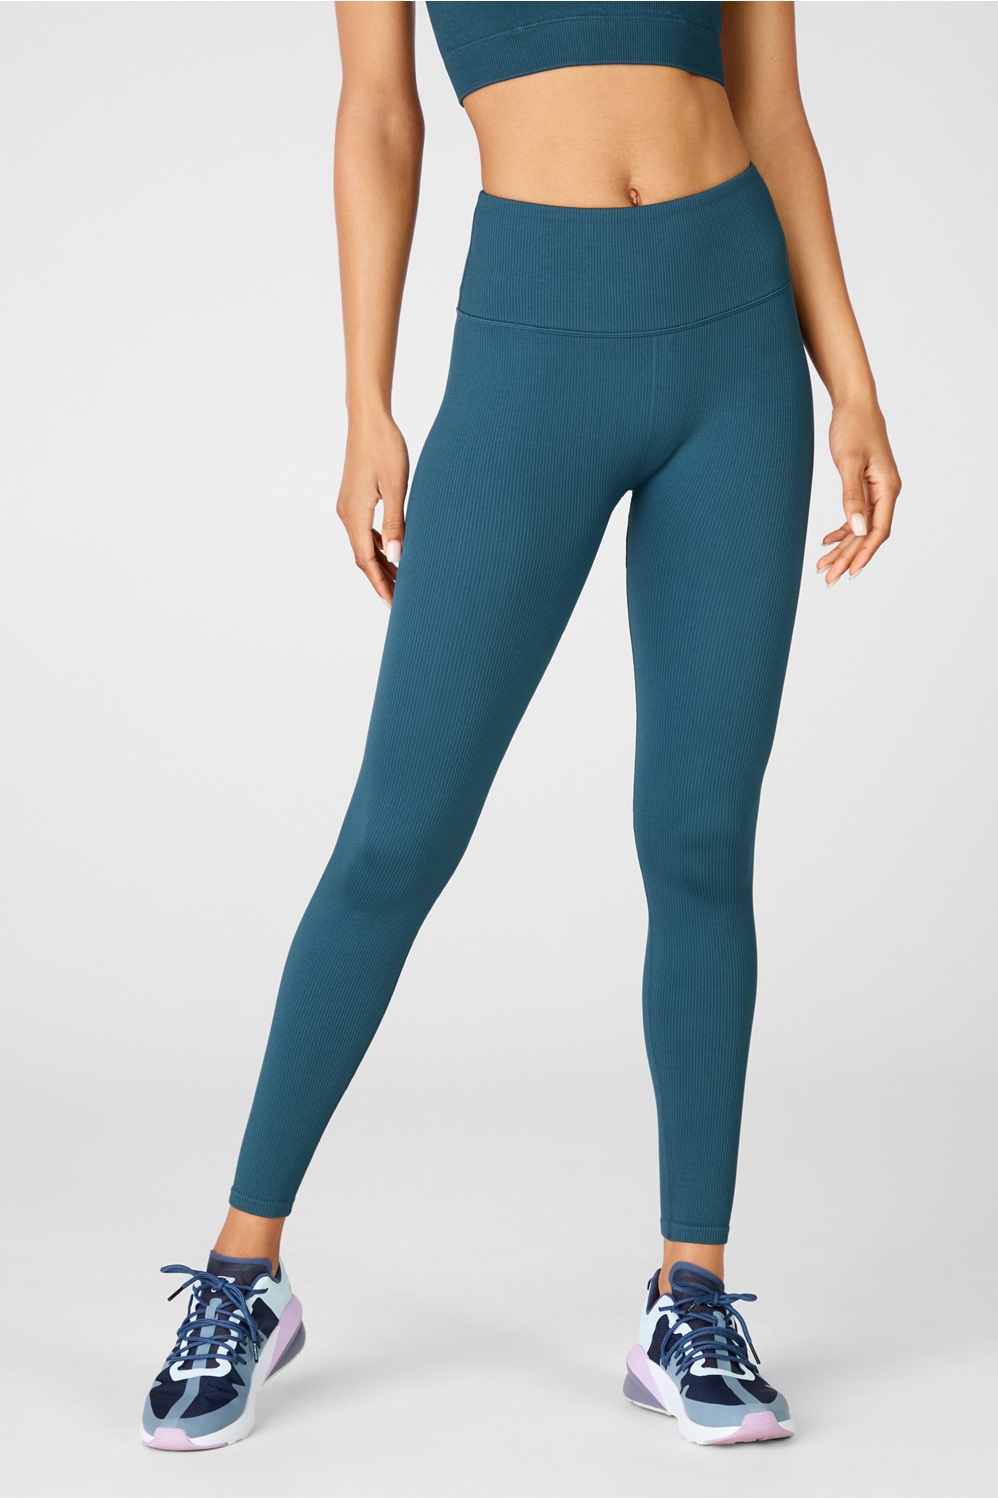 L FABLETICS Women's 'SEAMLESS LACE-UP' Celestial Blue HIGH-WAISTED LEGGINGS 